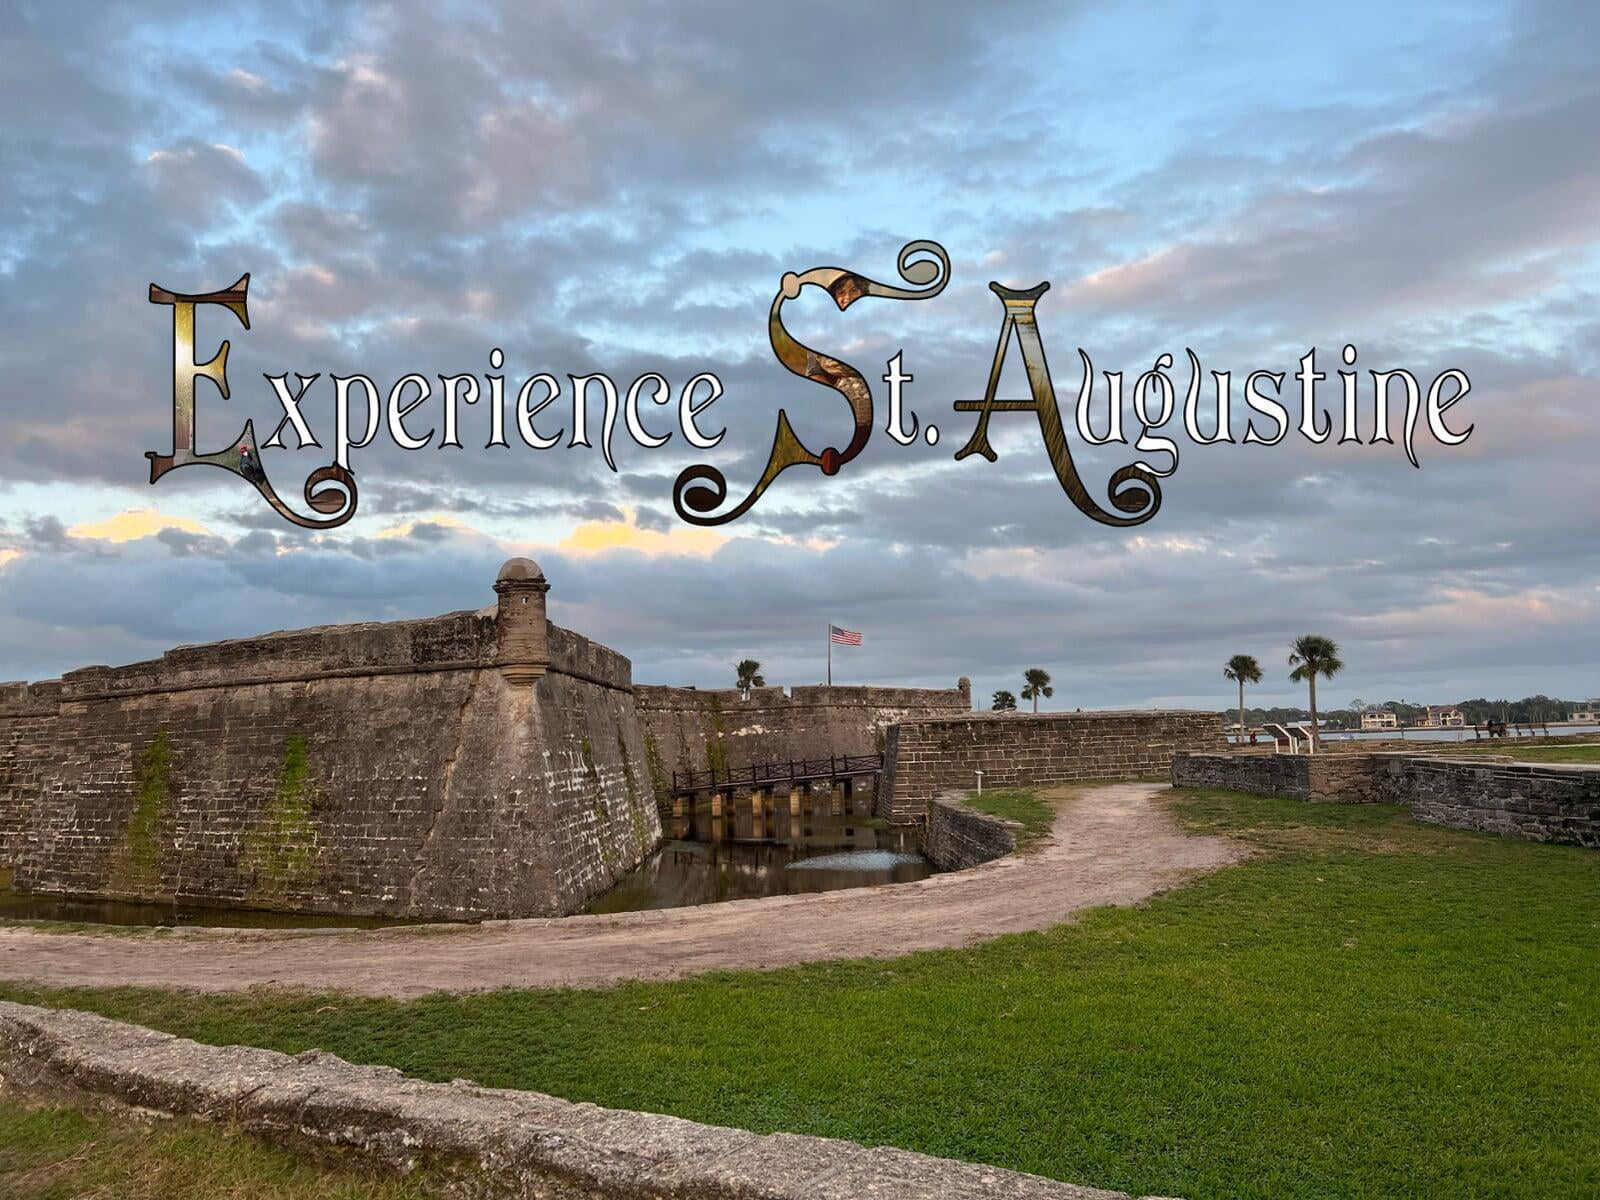 Experience St. Augustine